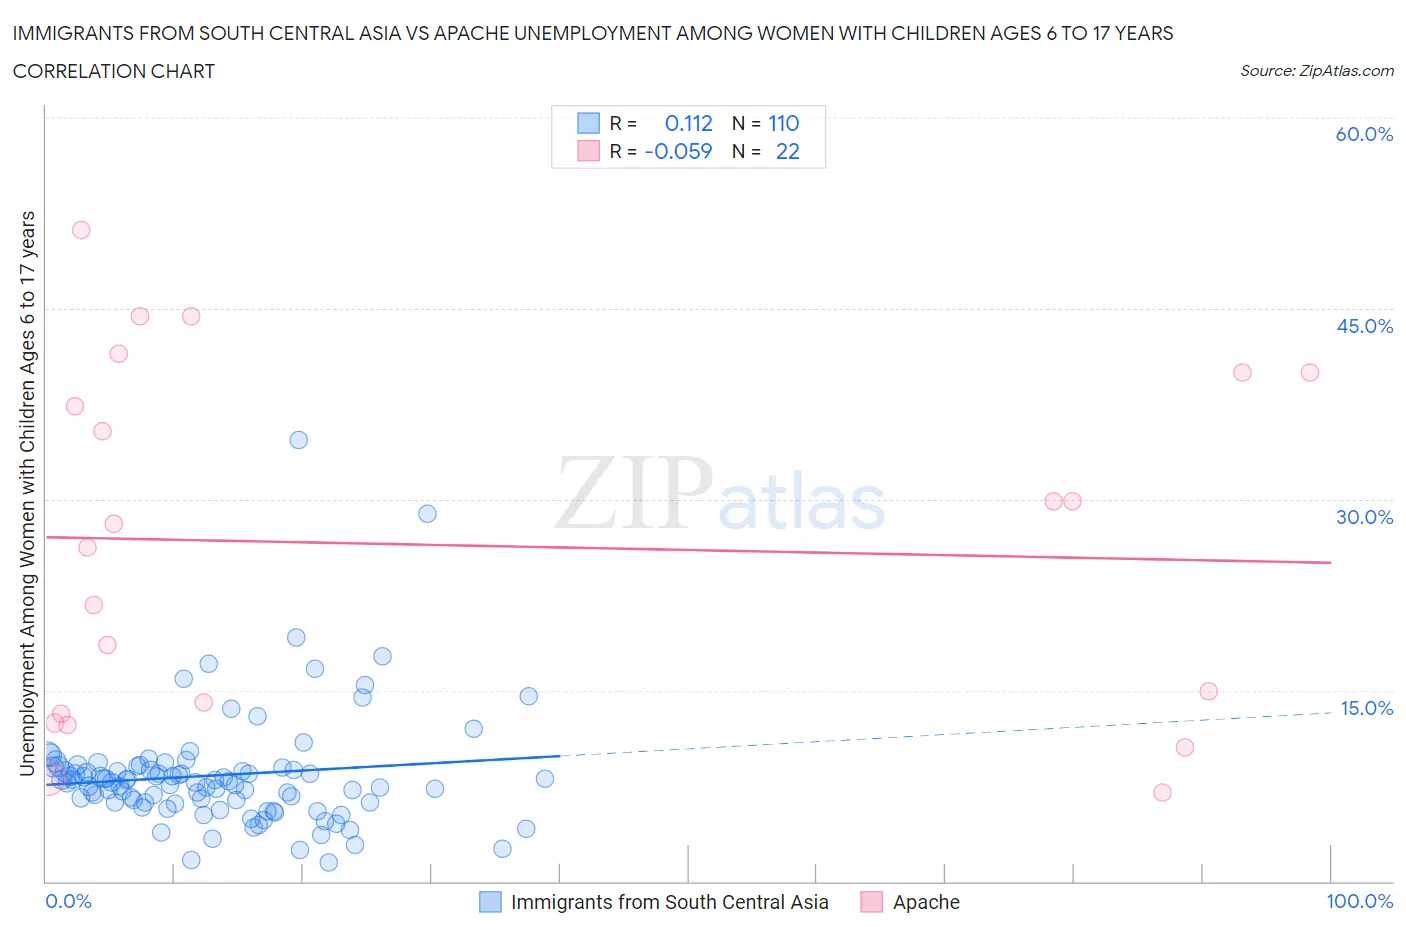 Immigrants from South Central Asia vs Apache Unemployment Among Women with Children Ages 6 to 17 years